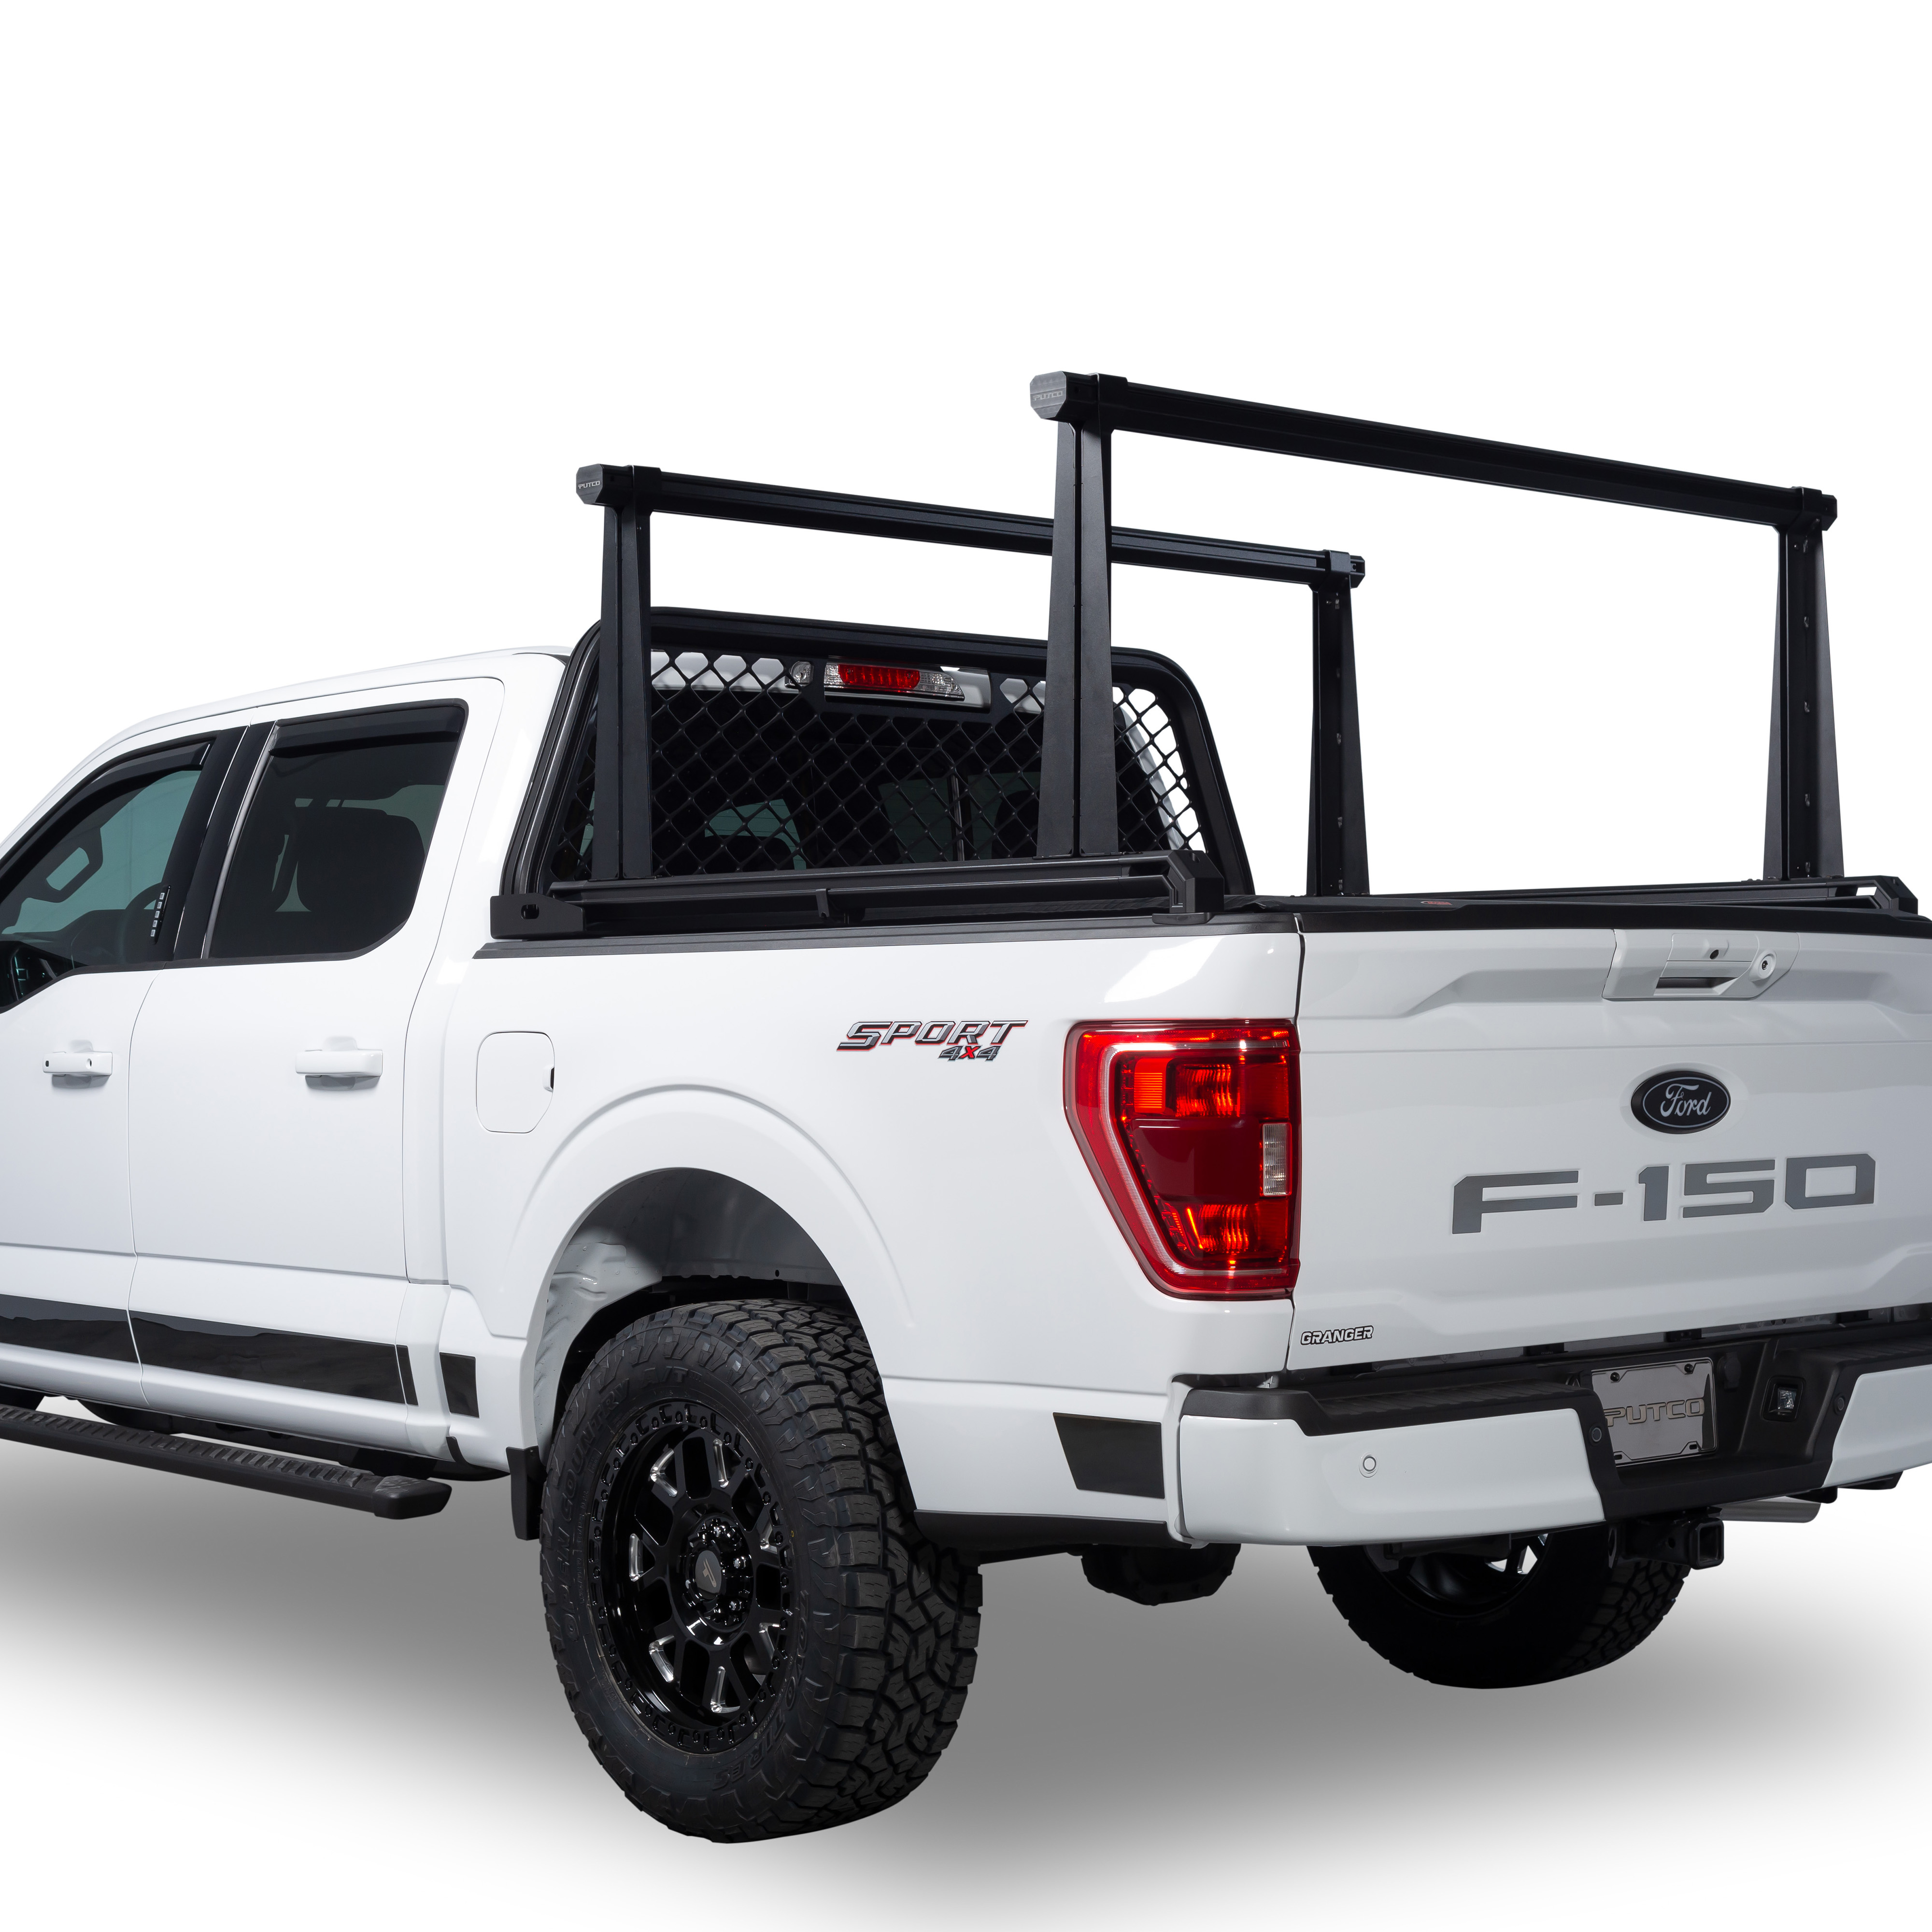 Putco Ultimate HD Truck Bed Rack System